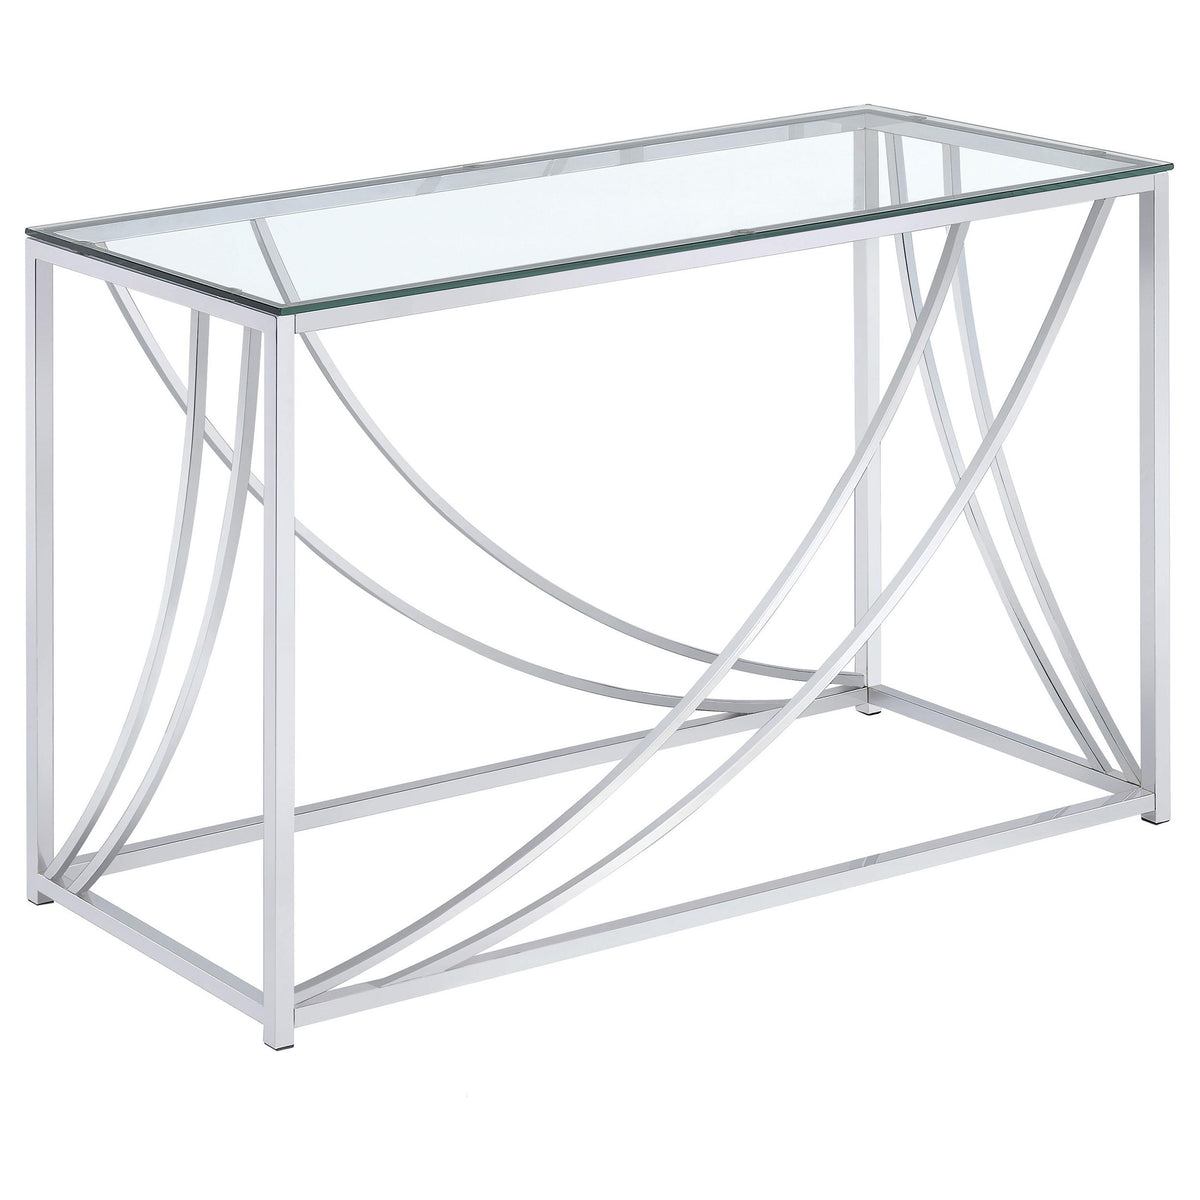 Lille Glass Top Rectangular Sofa Table Accents Chrome  Half Price Furniture